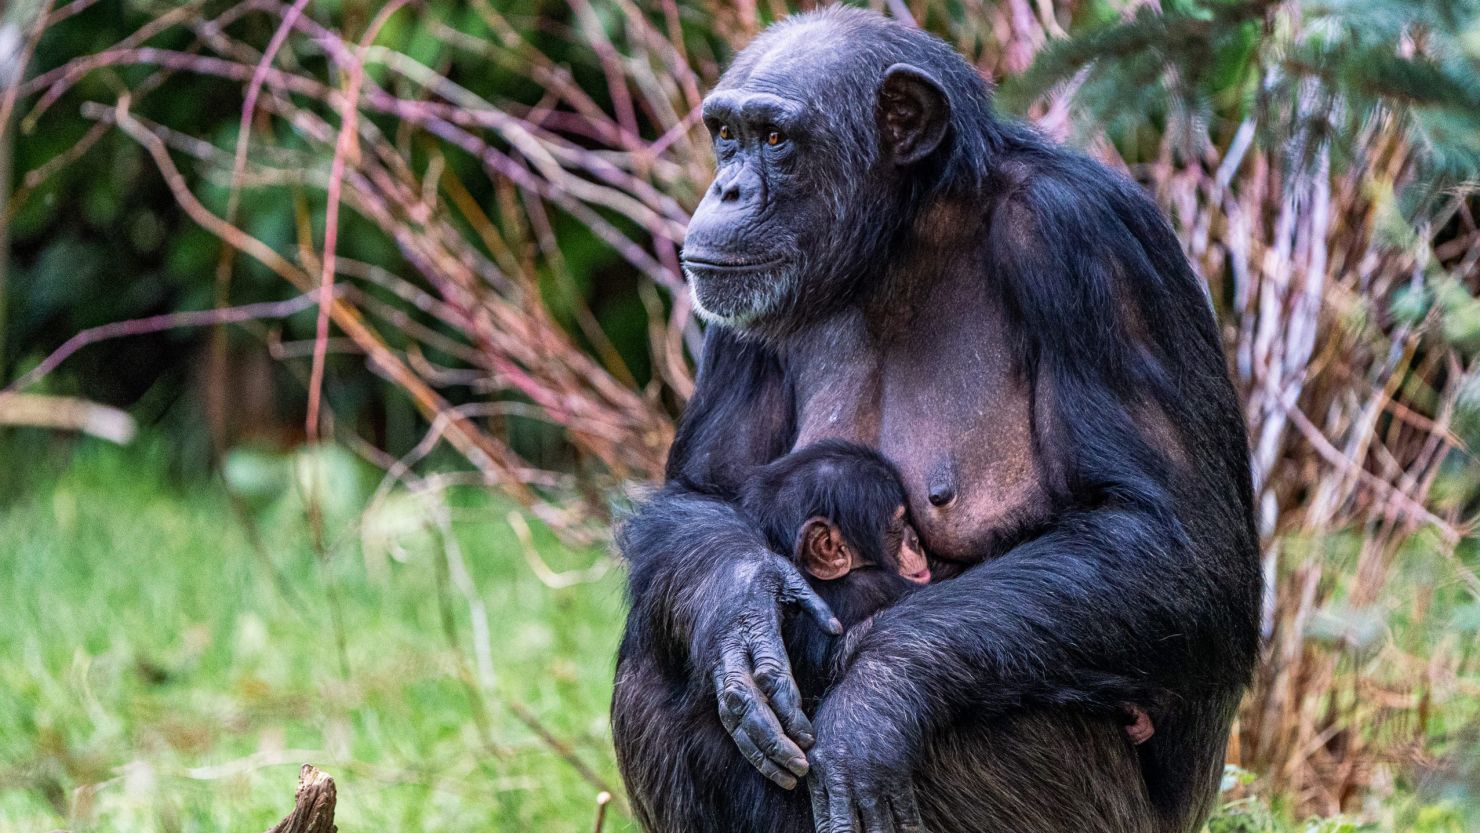 In a small but much-needed boost for the species, a critically endangered Western chimpanzee was born at the Chester Zoo.